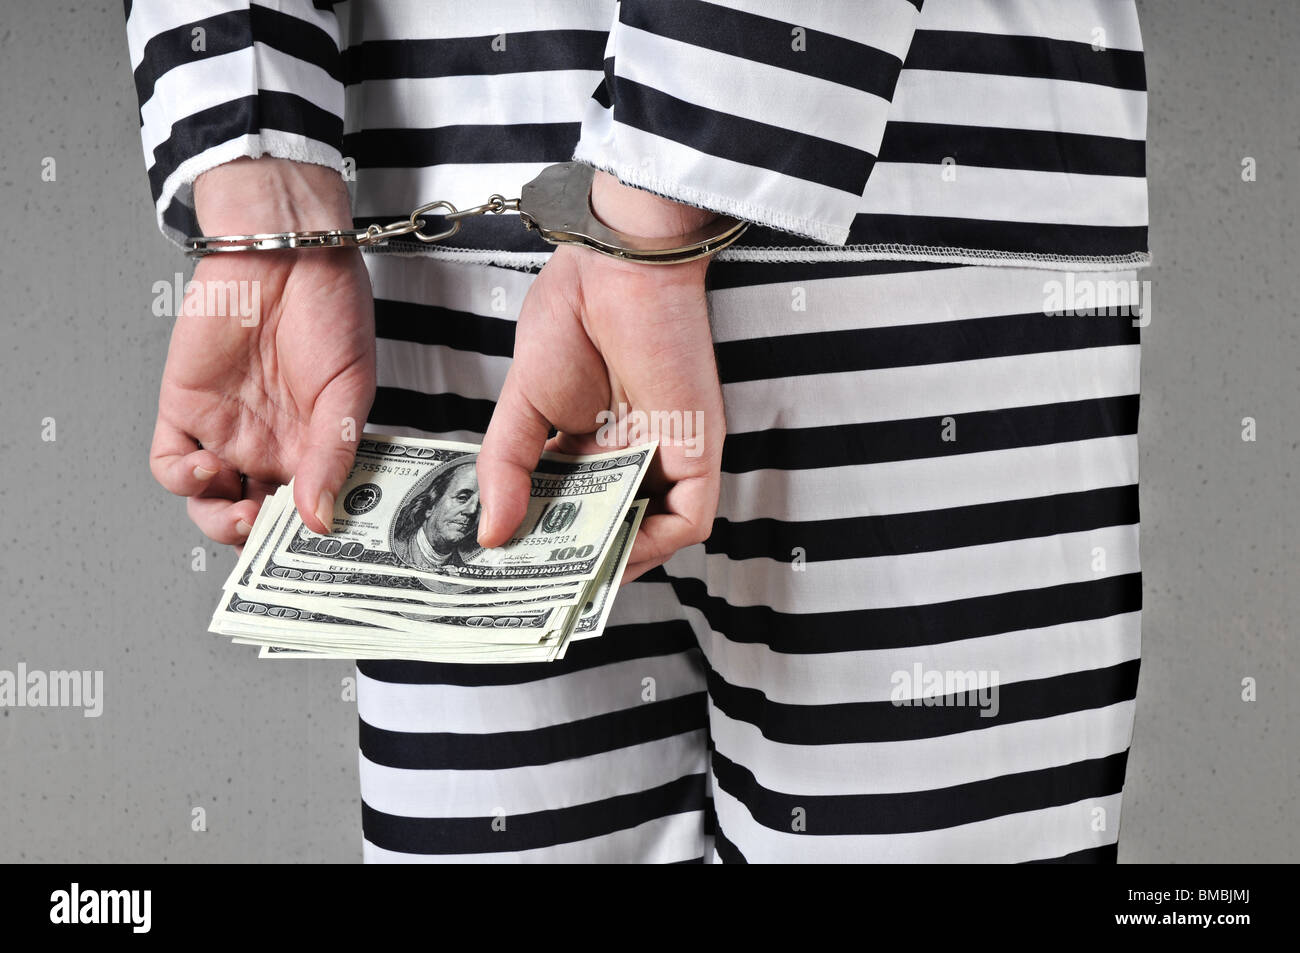 Hands in handcuffs holding pack of 100 dollar bills. Stock Photo